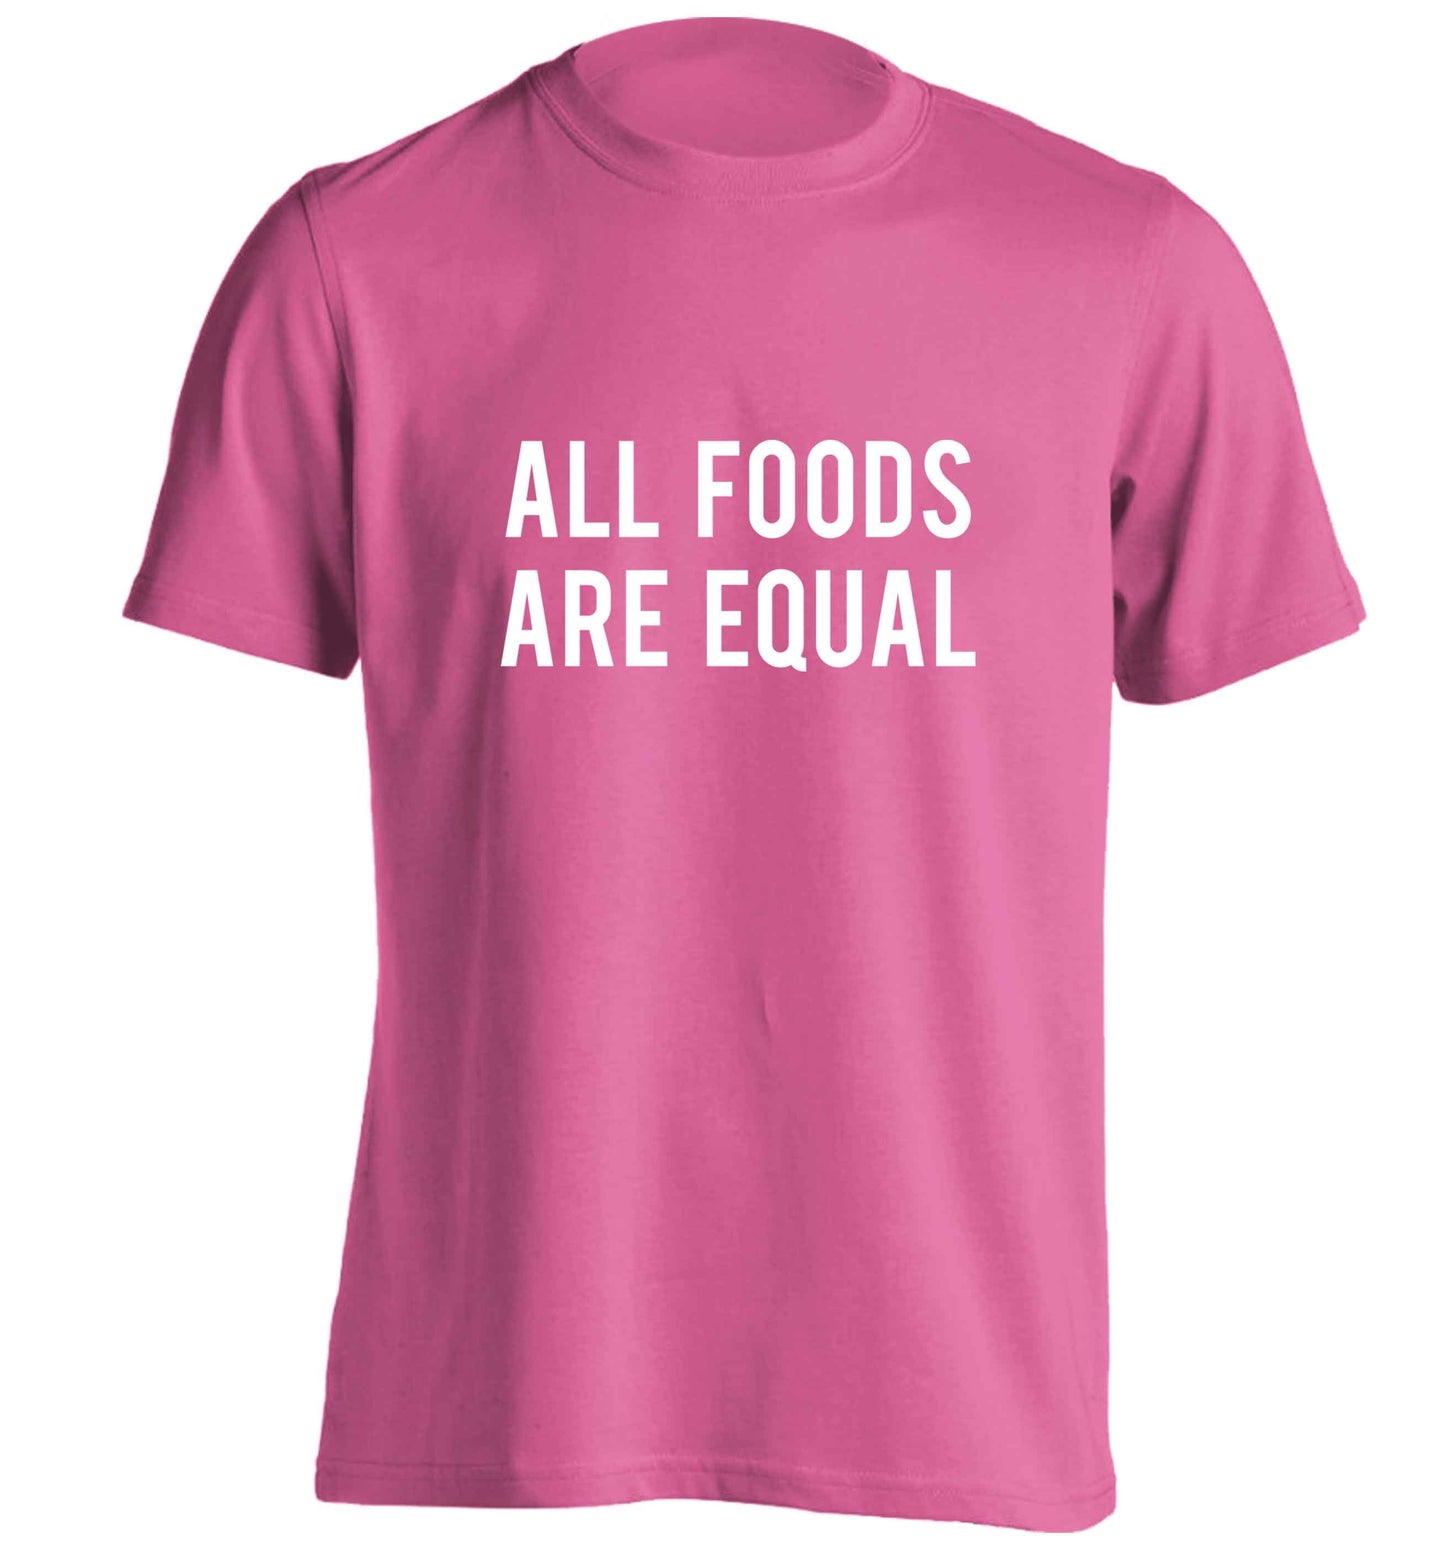 All foods are equal adults unisex pink Tshirt 2XL